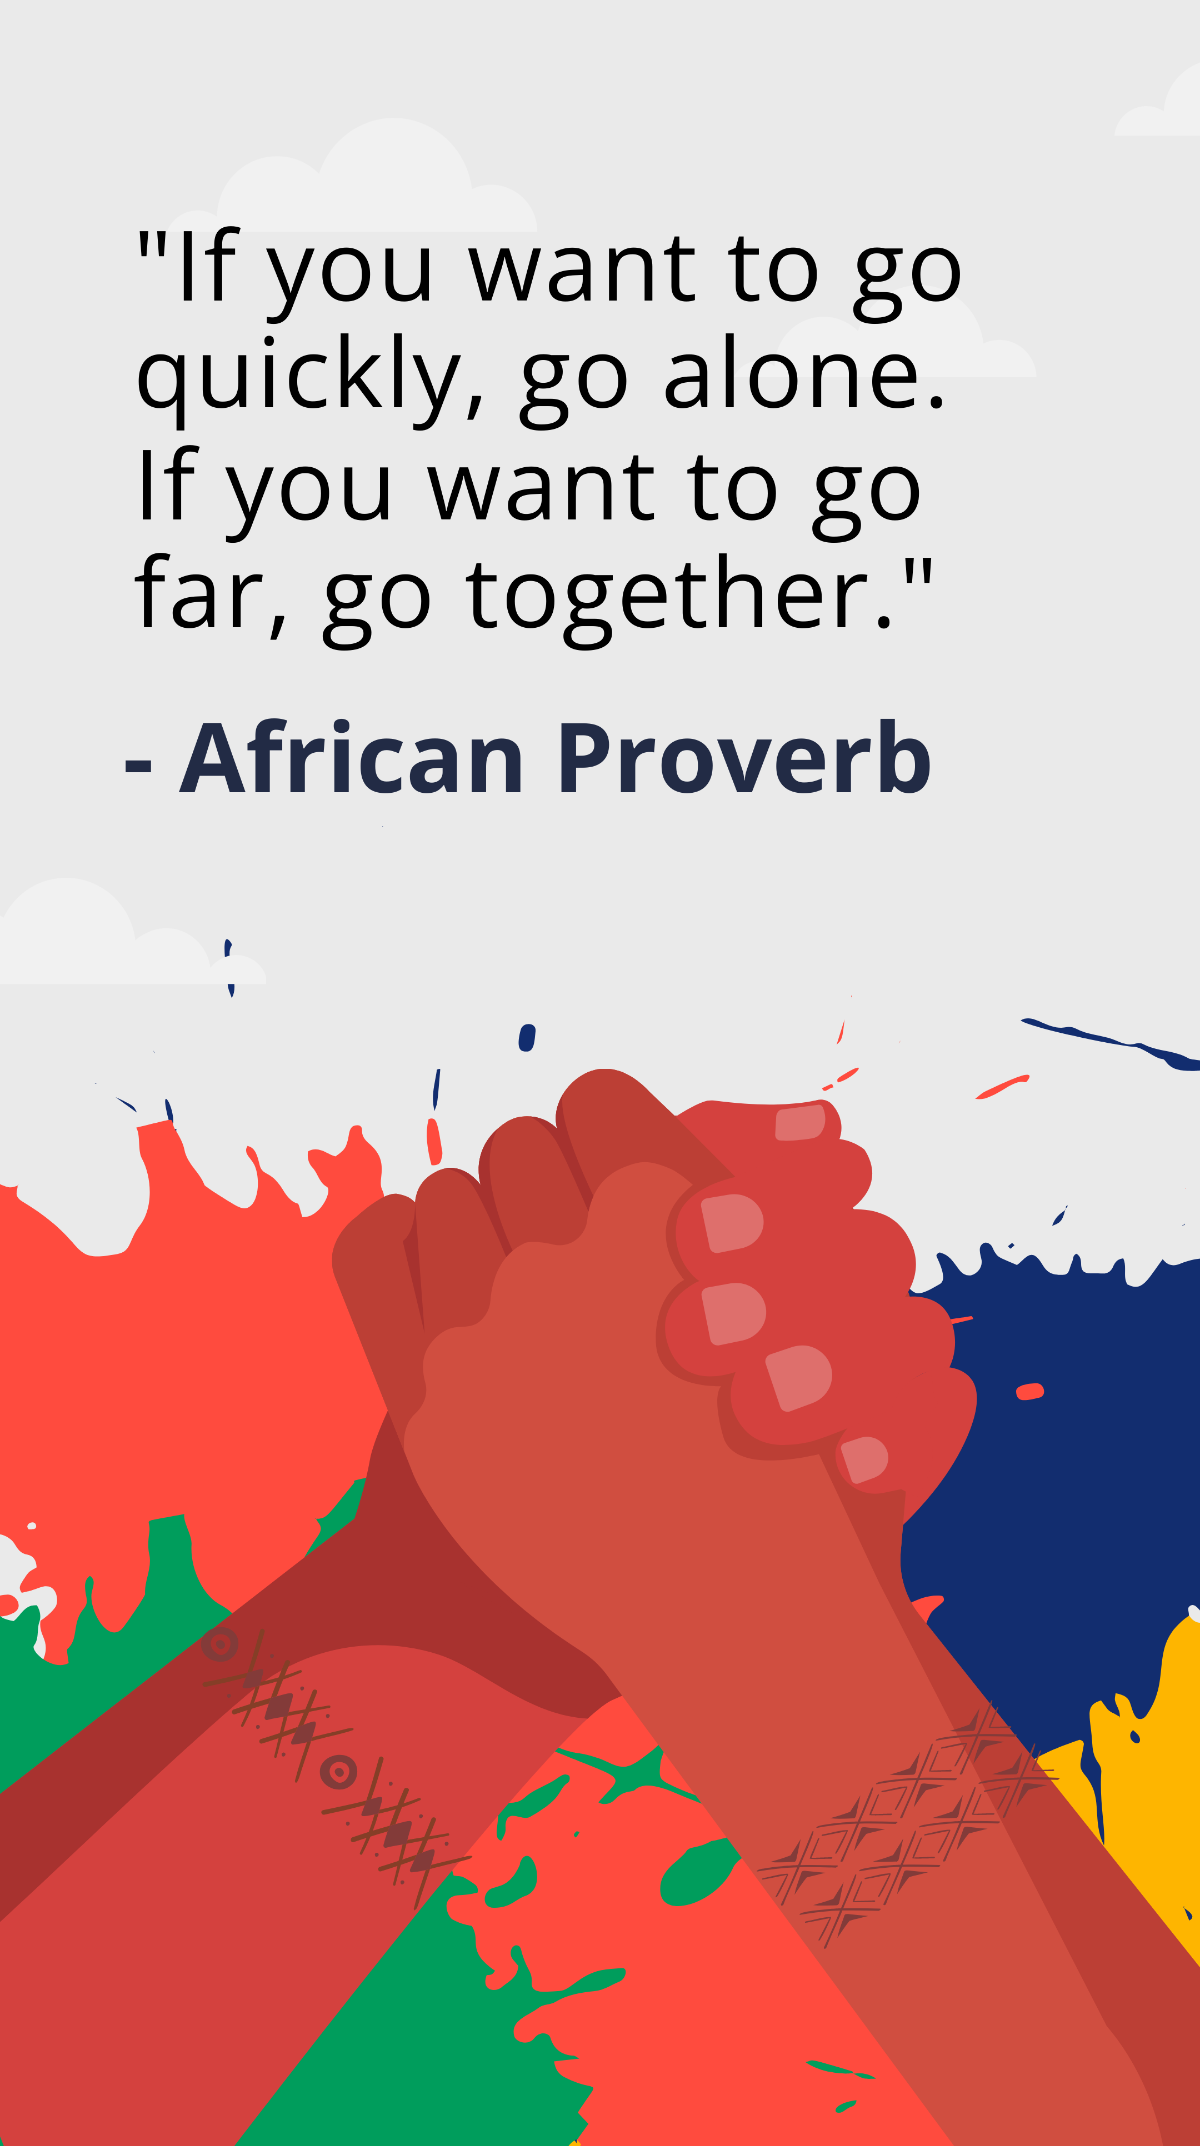 Free African Unity Day Quote Template